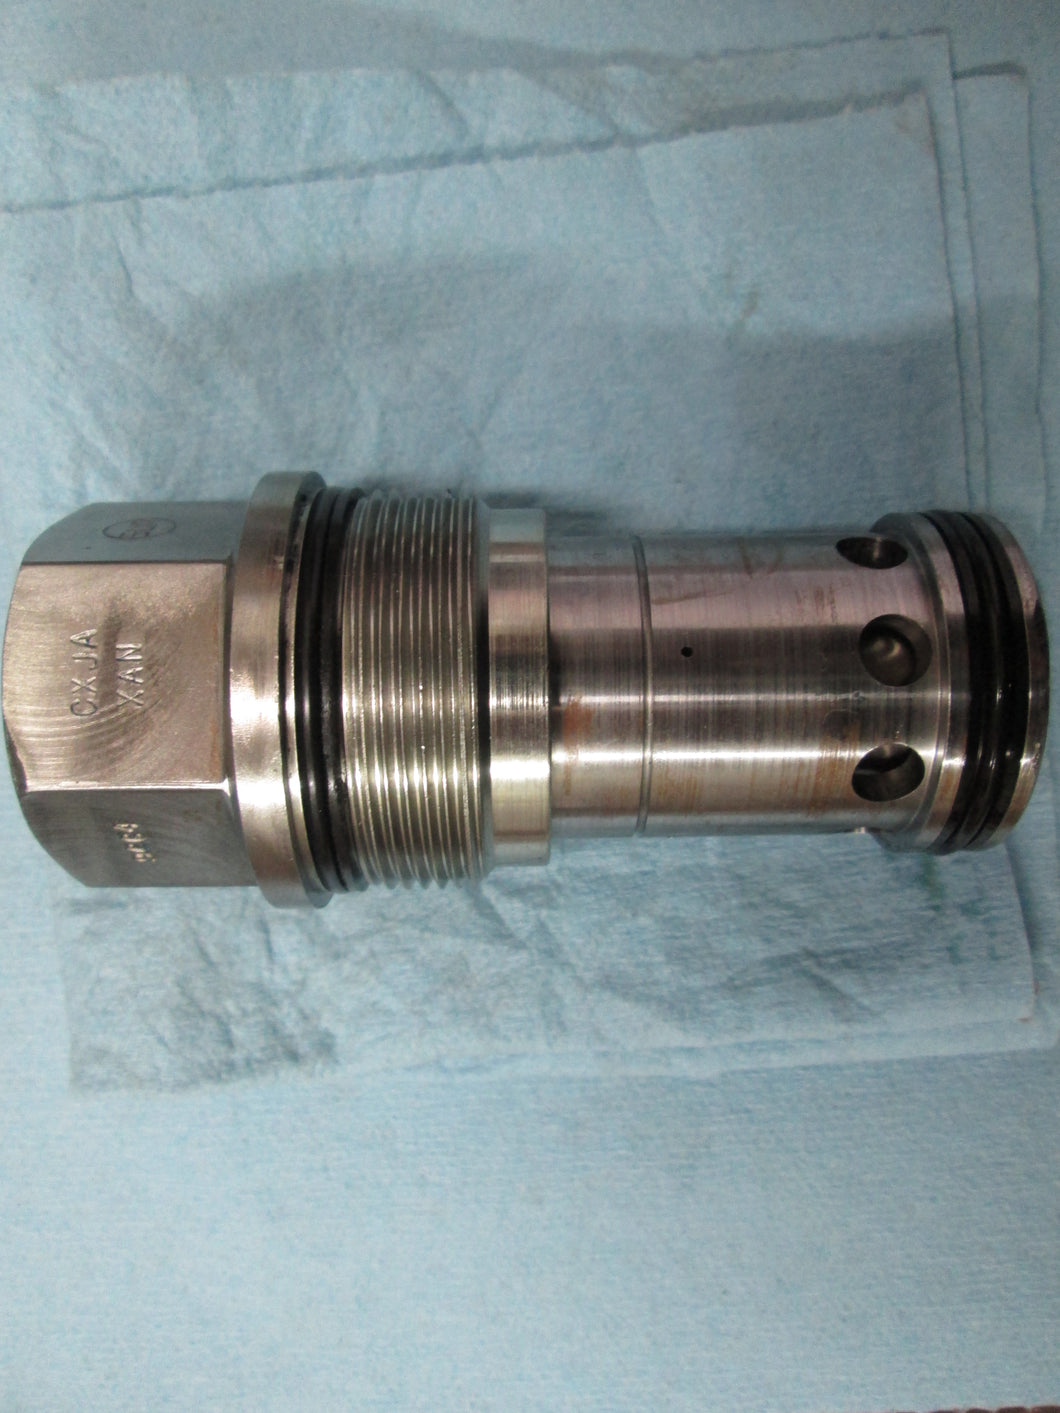 CXJA XAN   SUN HYDRAULICS   Free flow nose to side check valve